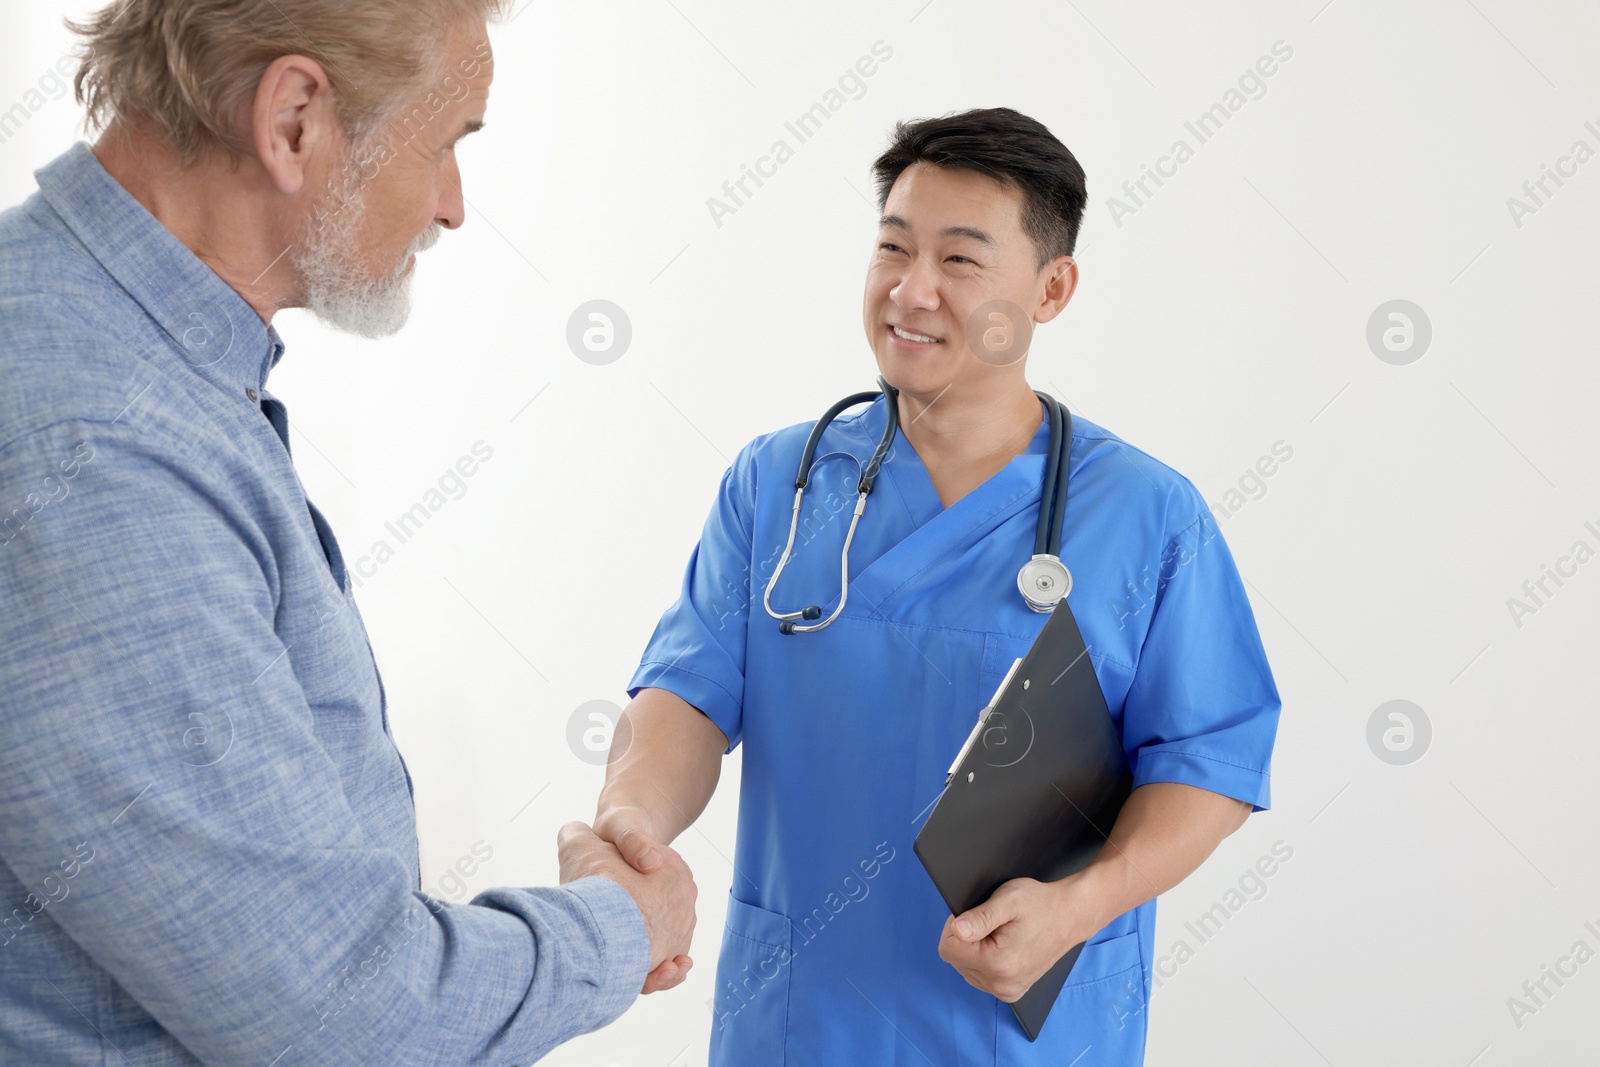 Photo of Happy doctor shaking hands with patient on white background